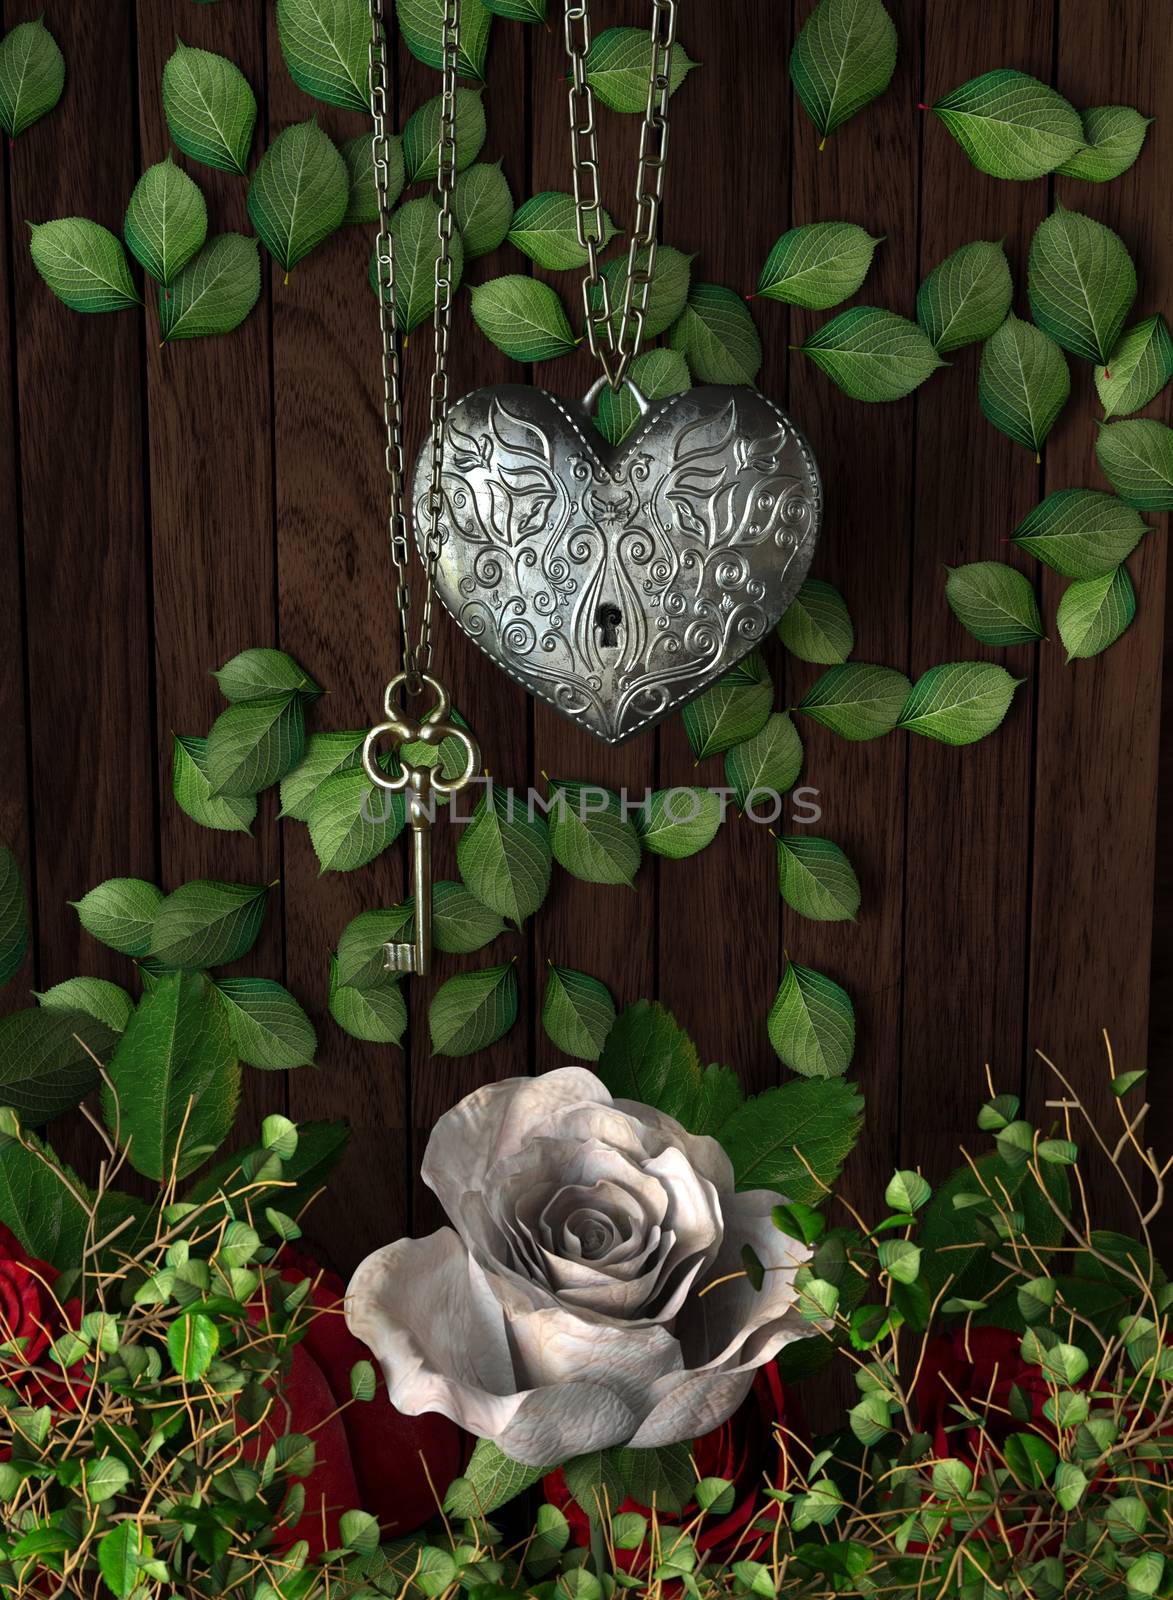 Roses and a heart with key on wooden board, conceptual holiday background by denisgo